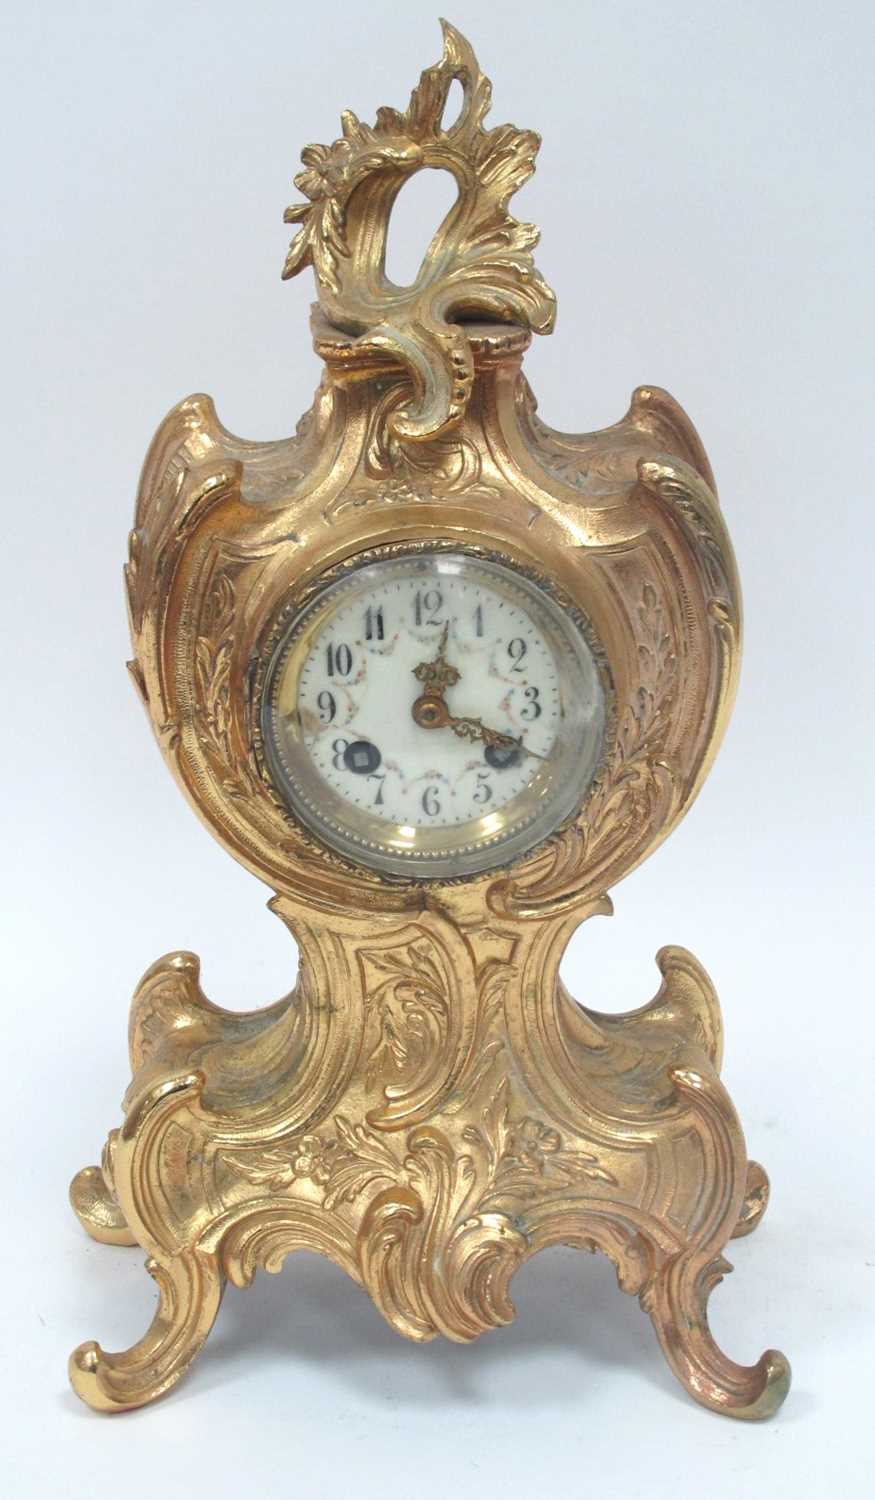 A Late XIX Century French Mantle Clock, the ornate ormolu case cast with scrollwork and flowers, the